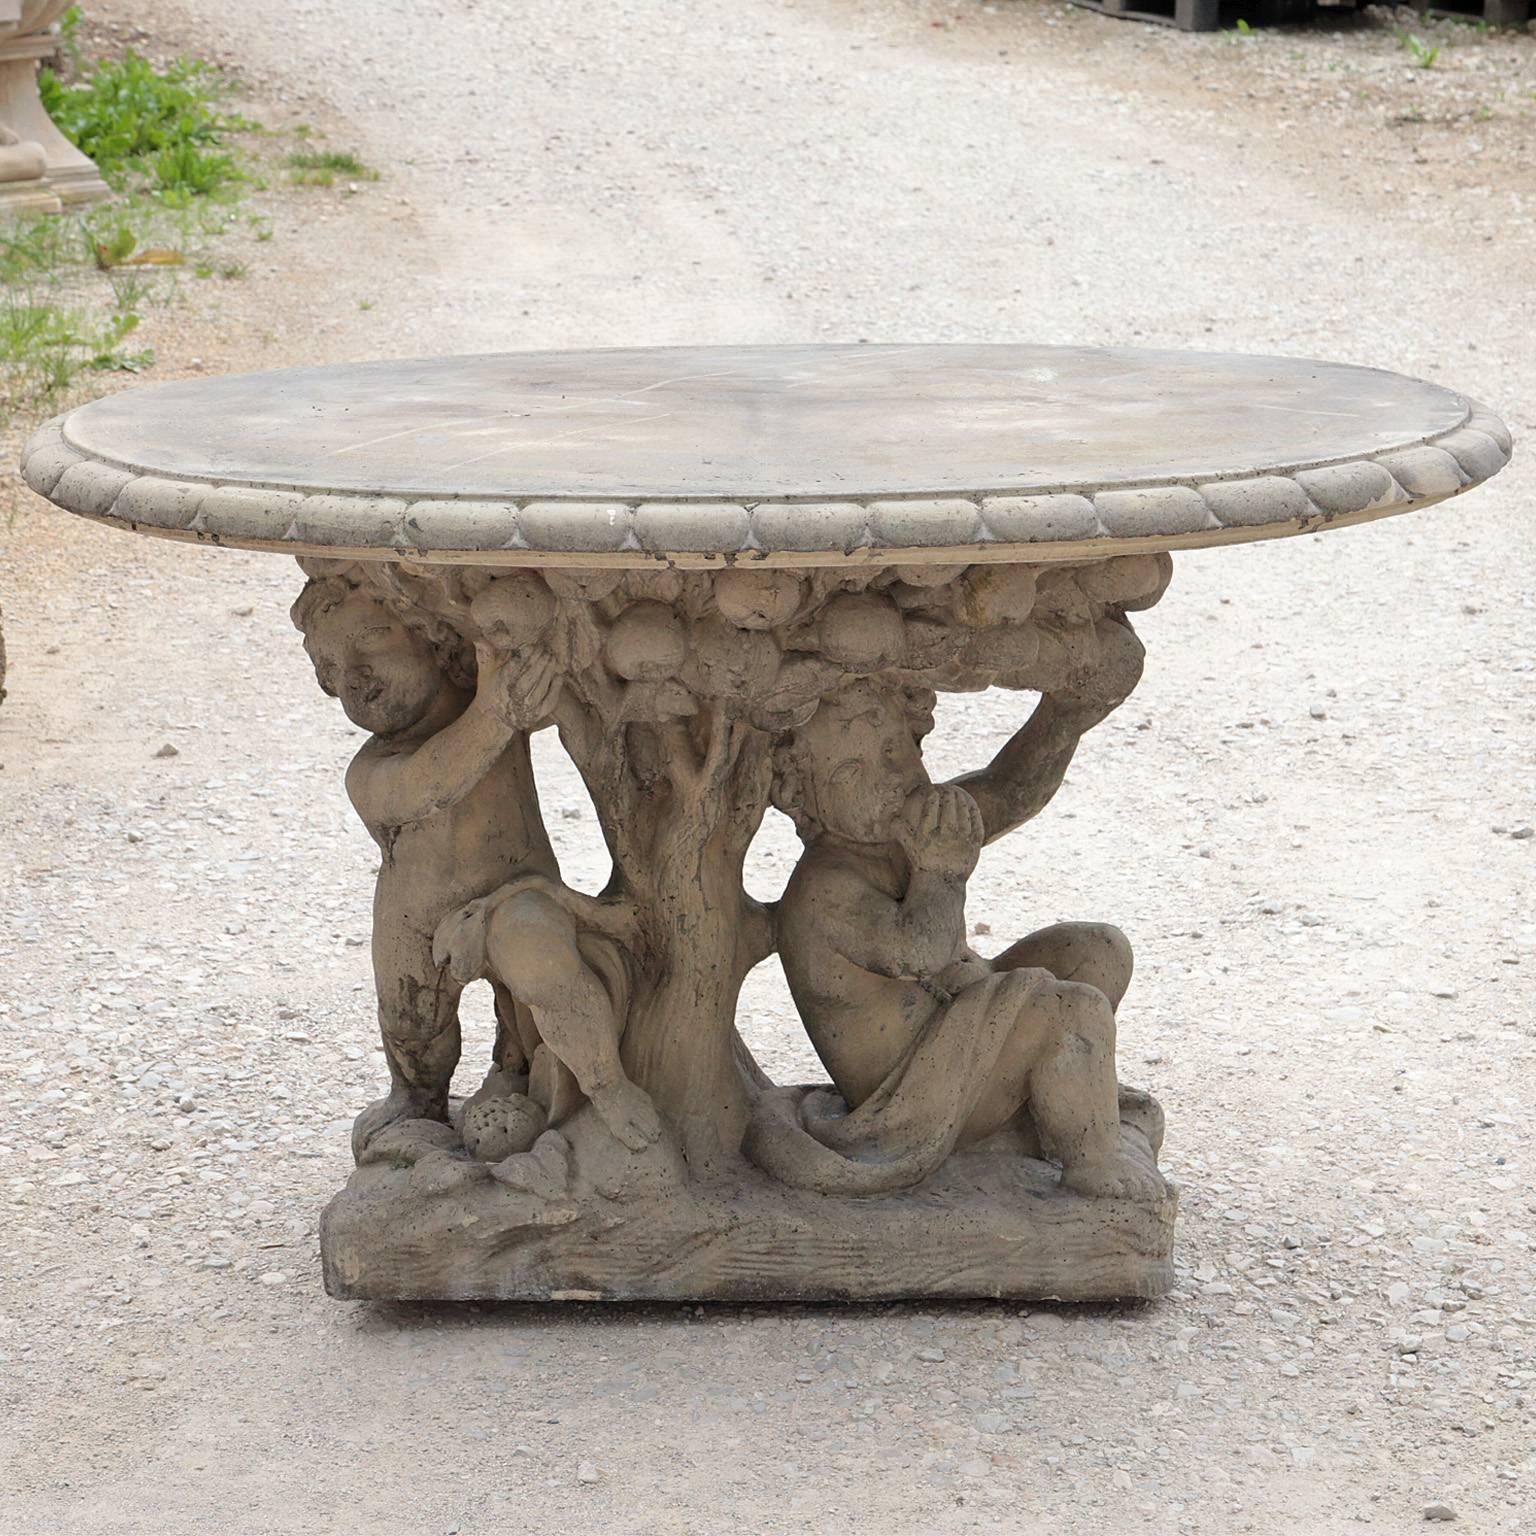 Oval shaped garden table with children under the surface. The foot depicts an apple tree. This table is available in various colors including antique grey, antique white, sandstone and terracotta.